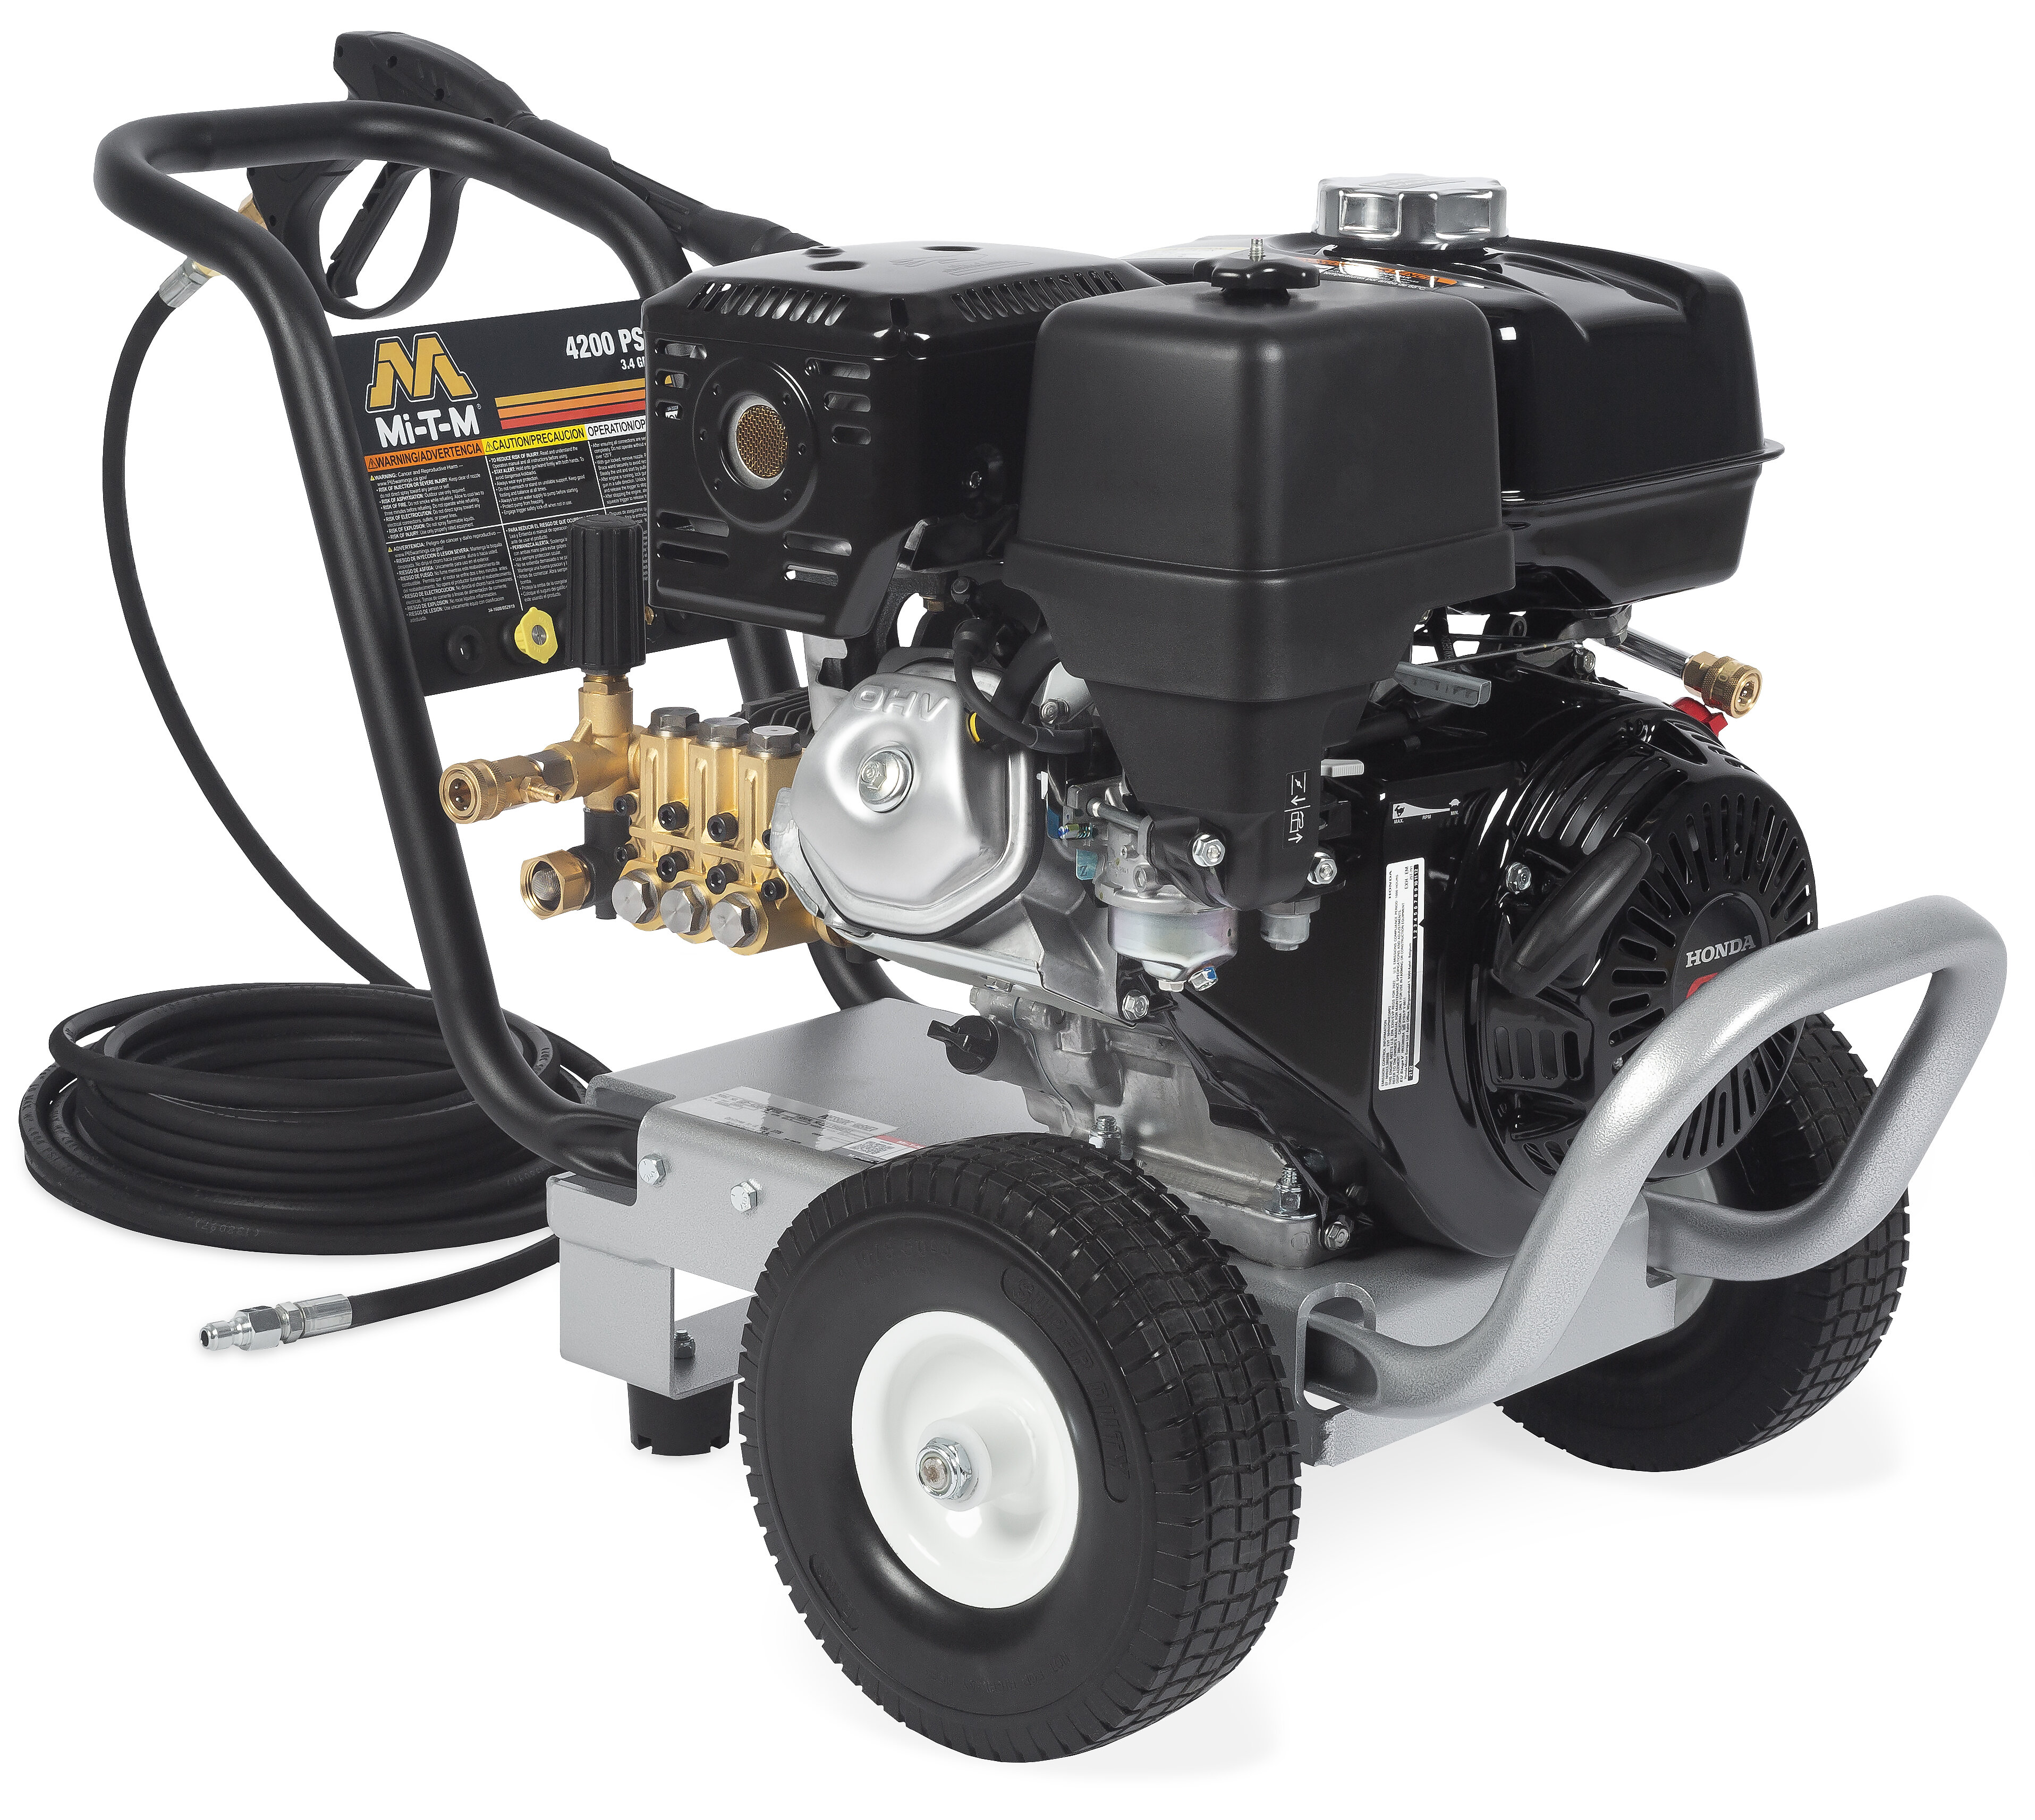 Electric Pressure Washer 4200 PSI +2.8 GPM Power Washers Electric Powered  with Three Modes of Touch Screen Adjustable Pressure,4 Nozzles and Foam